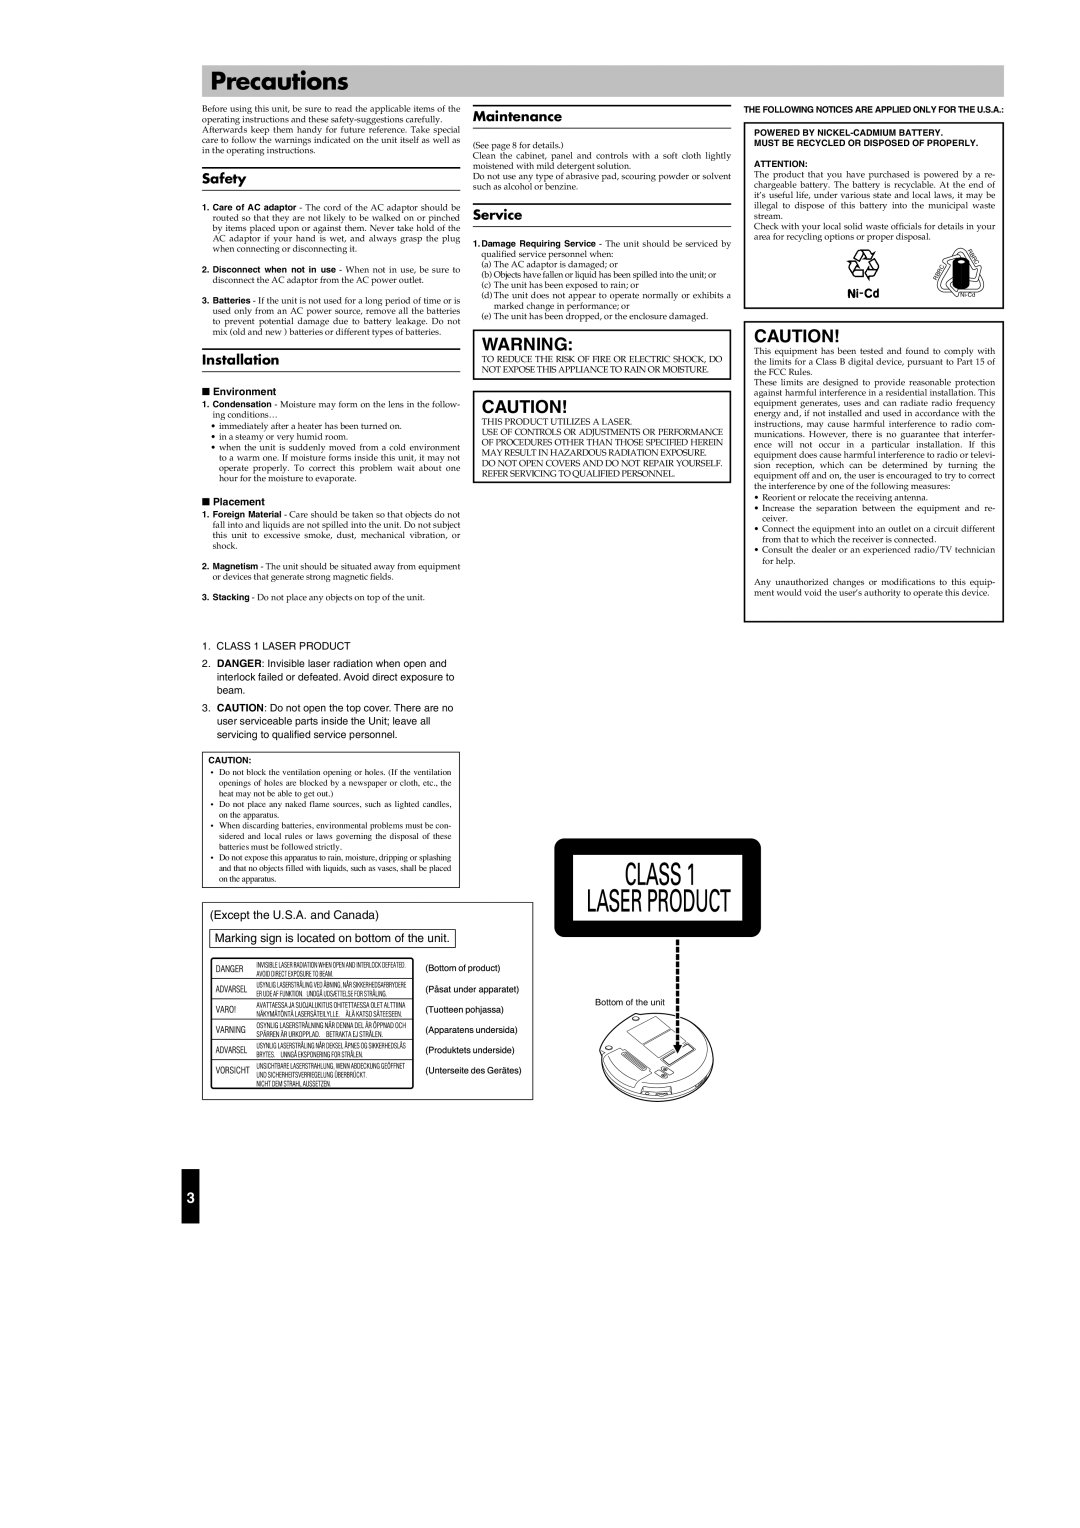 JVC XL-PR1BK manual Precautions, Safety, Installation, Maintenance, Service, Except the U.S.A. and Canada 